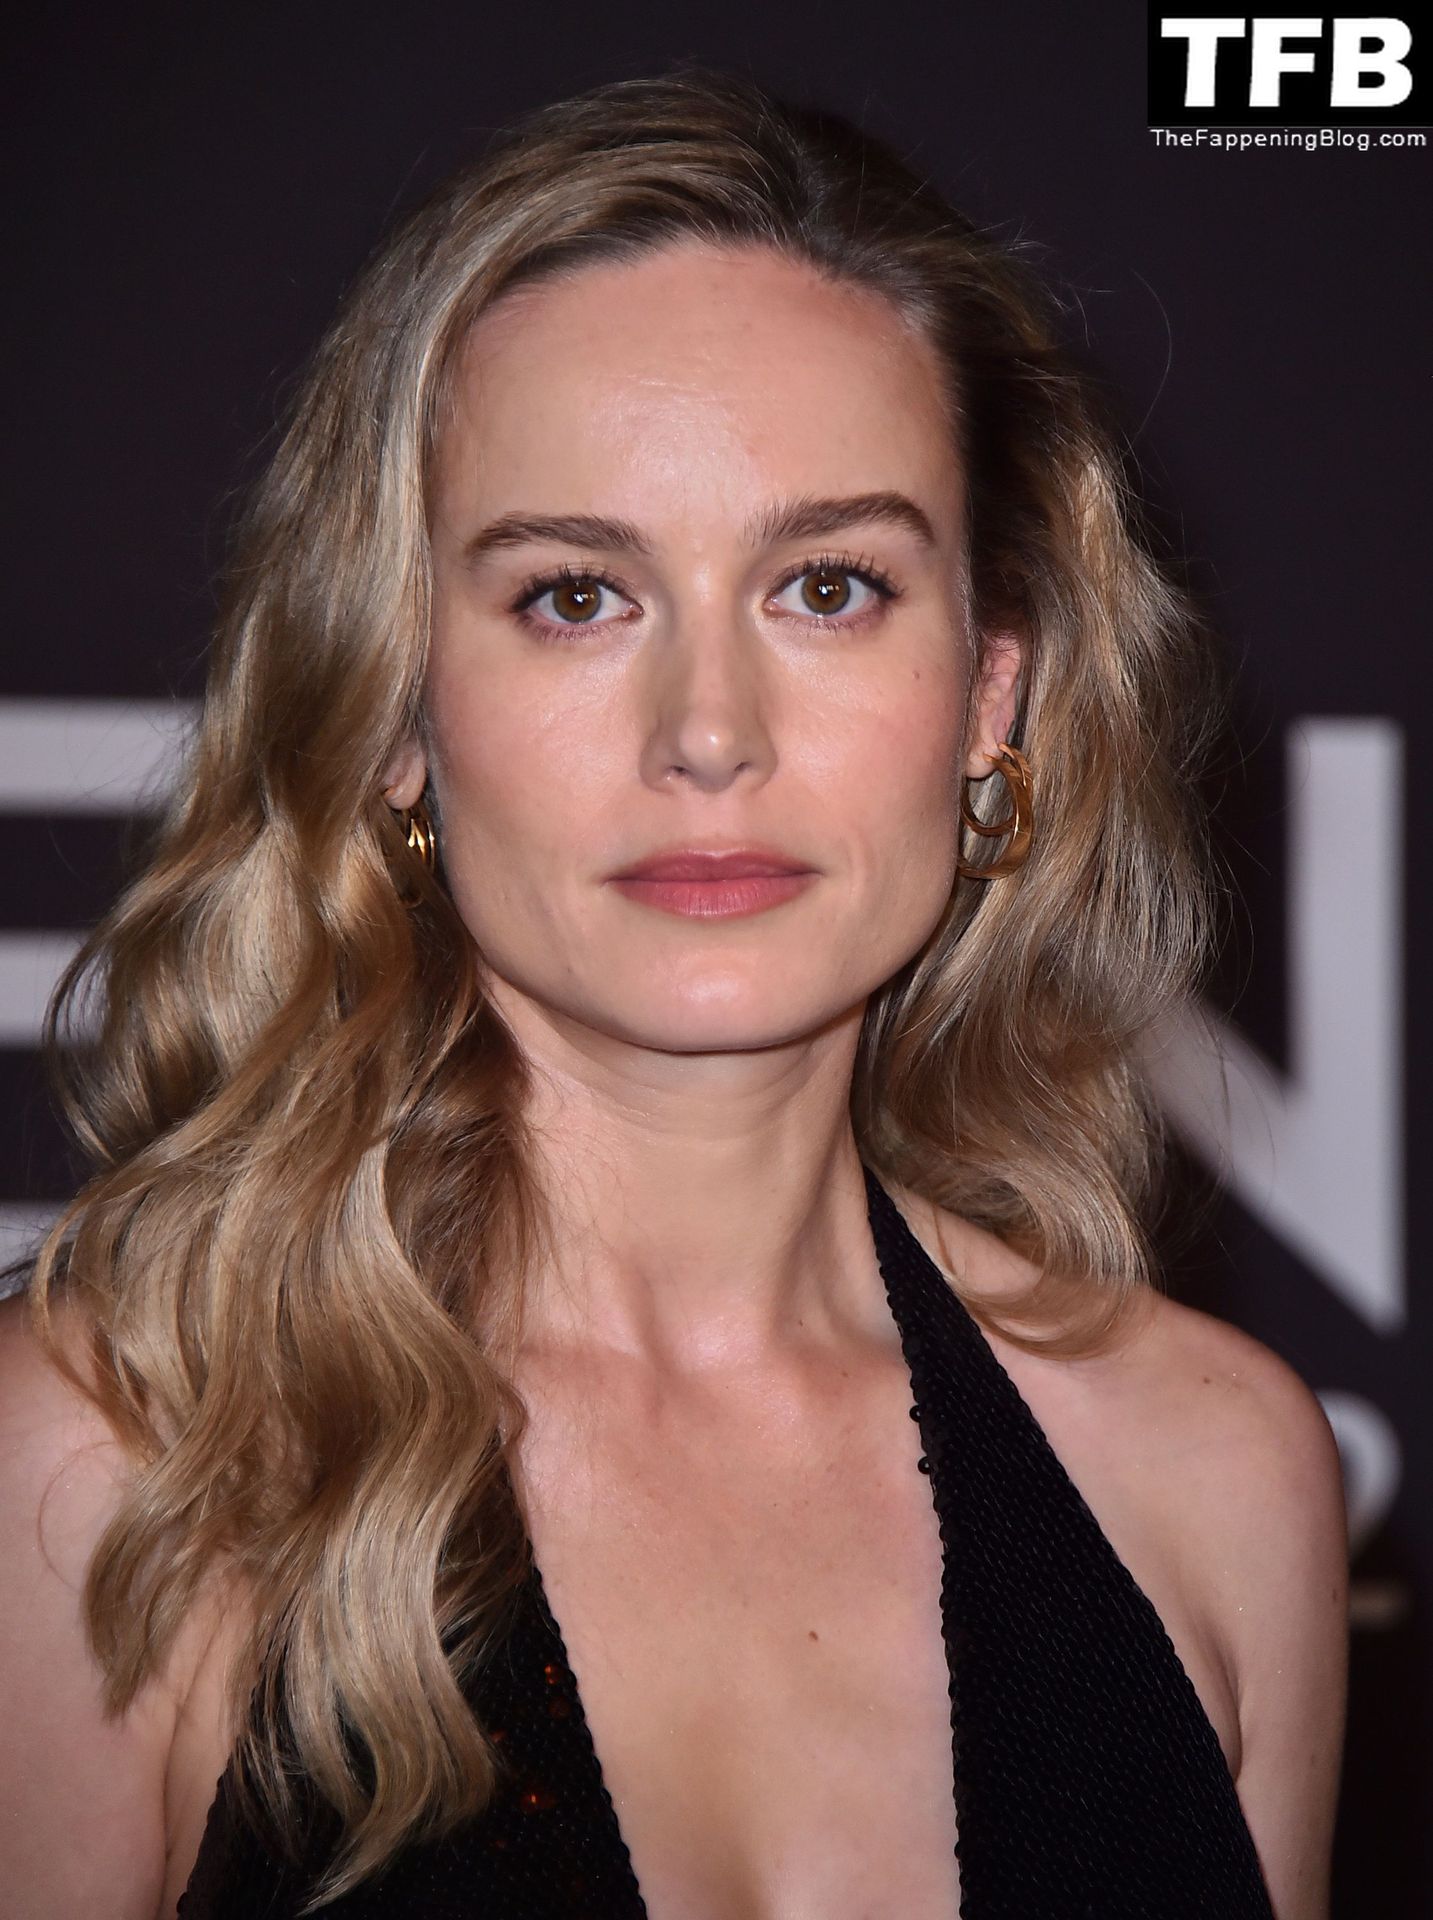 Brie-Larson-Sexy-The-Fappening-Blog-10.jpg